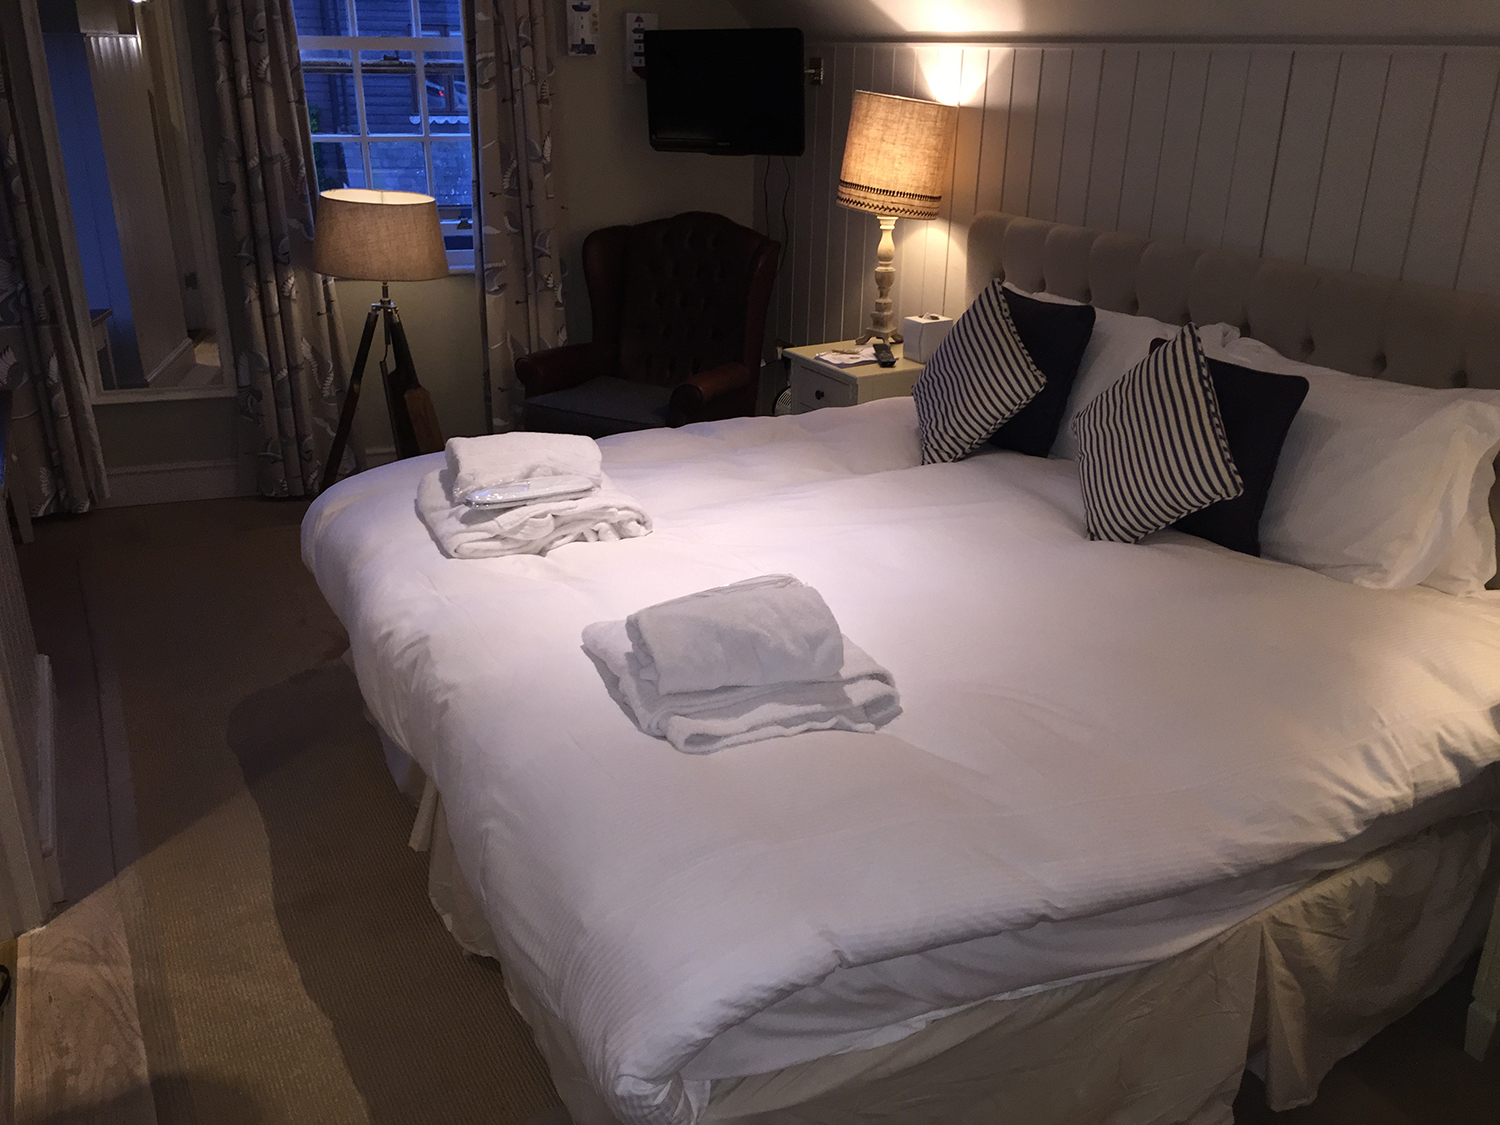 Room at the Swan Arundel